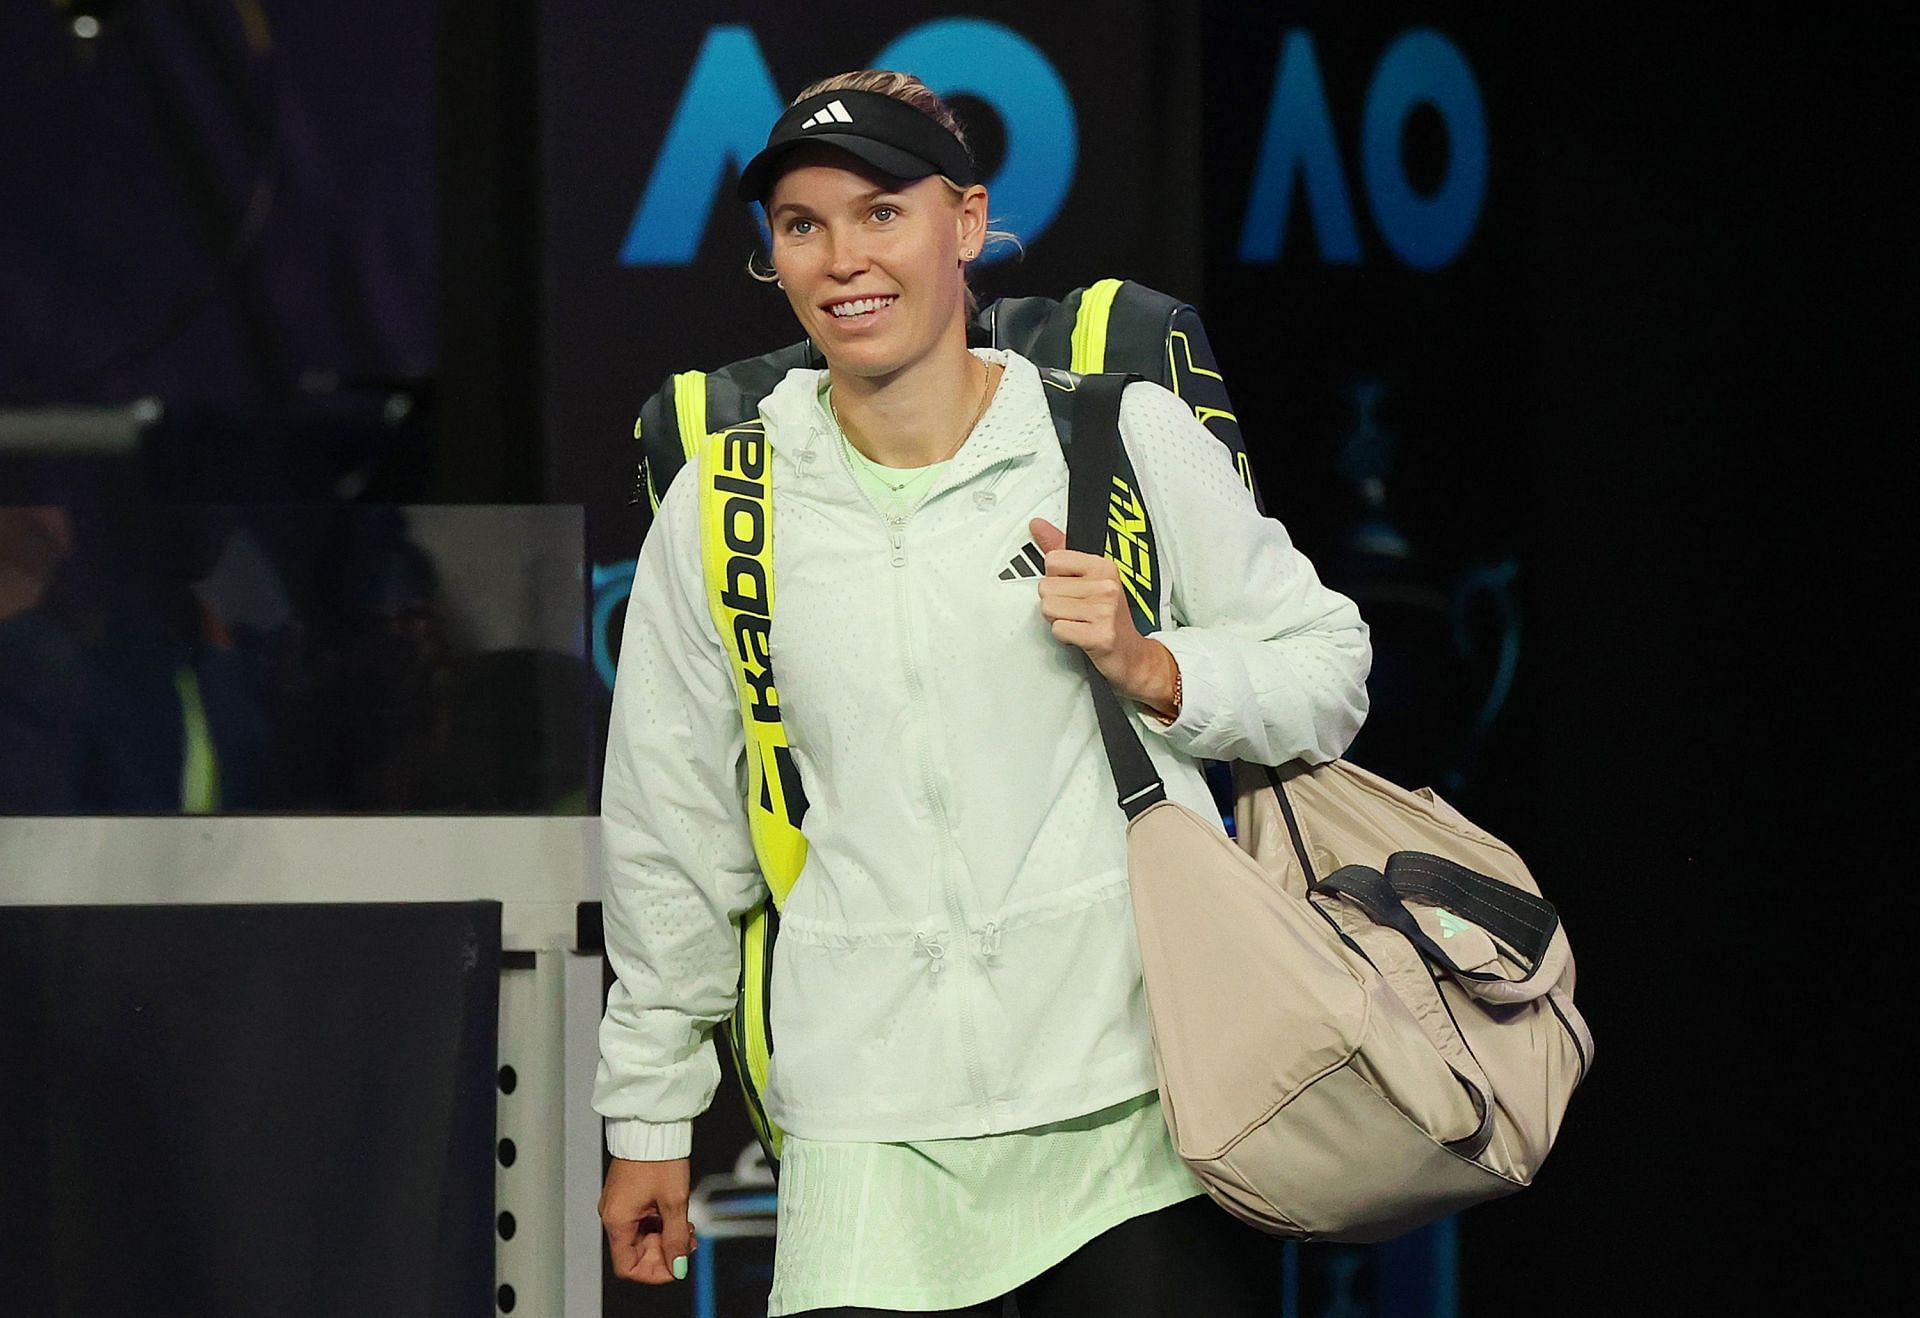 Caroline Wozniacki will also be in action at the tournament.